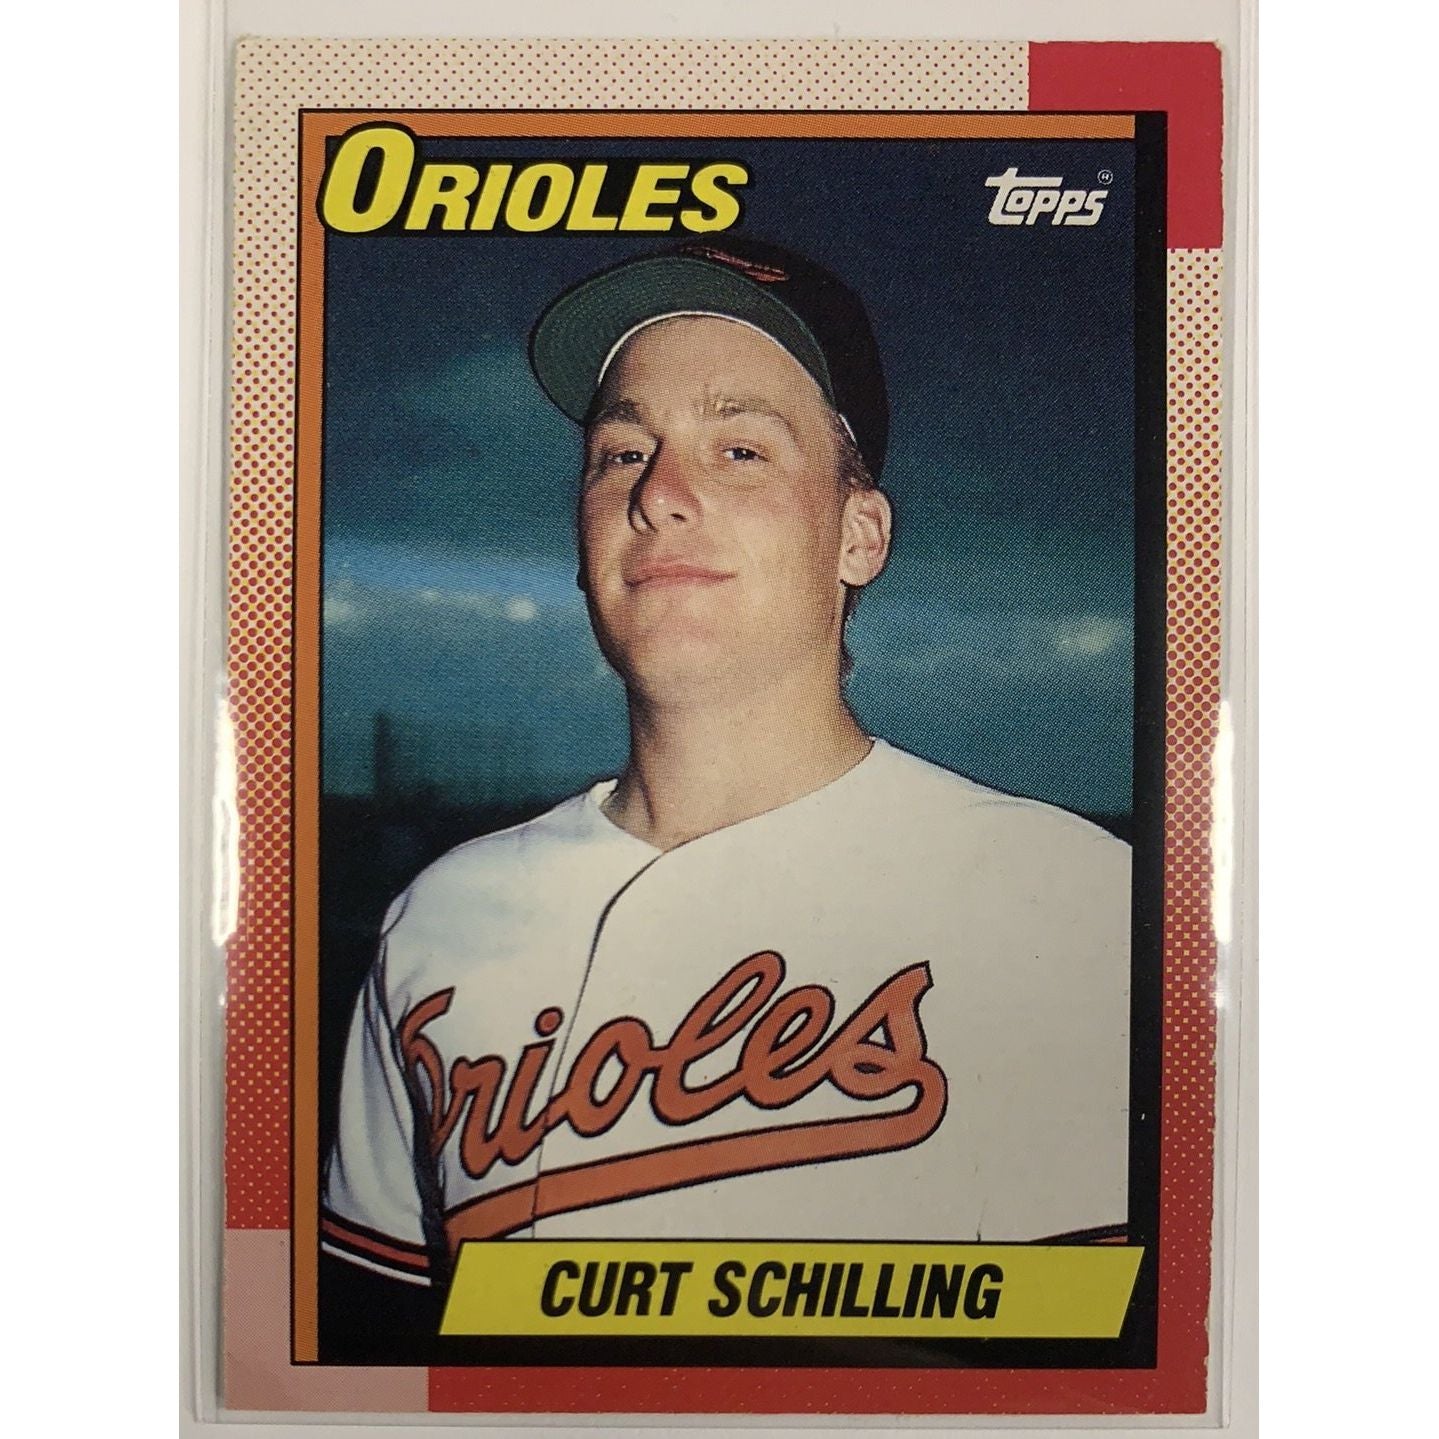  1990 O-Pee-Chee Topps Curt Schilling RC  Local Legends Cards & Collectibles